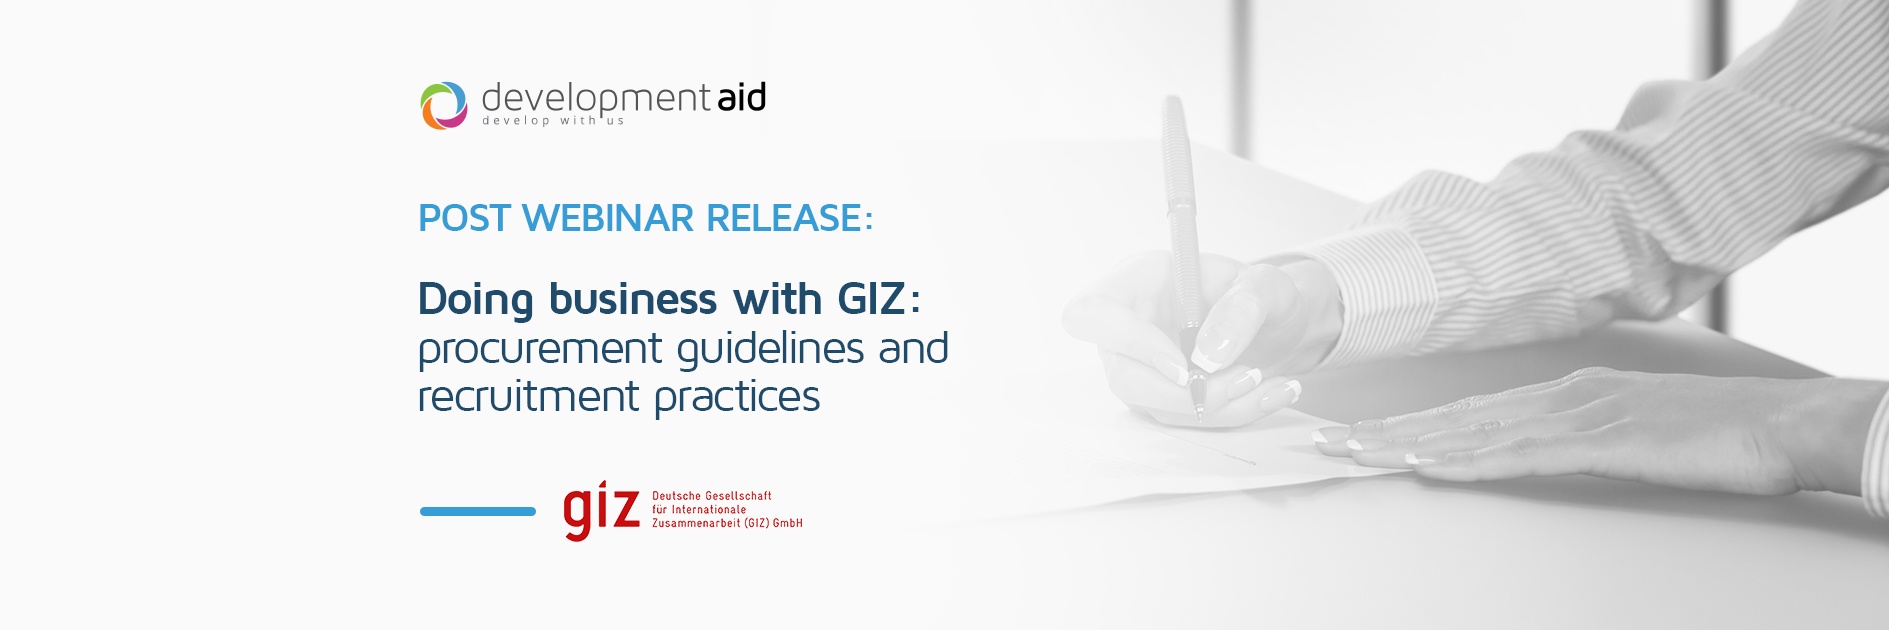 Post Webinar Release | “Doing business with GIZ: procurement guidelines and recruitment practices”